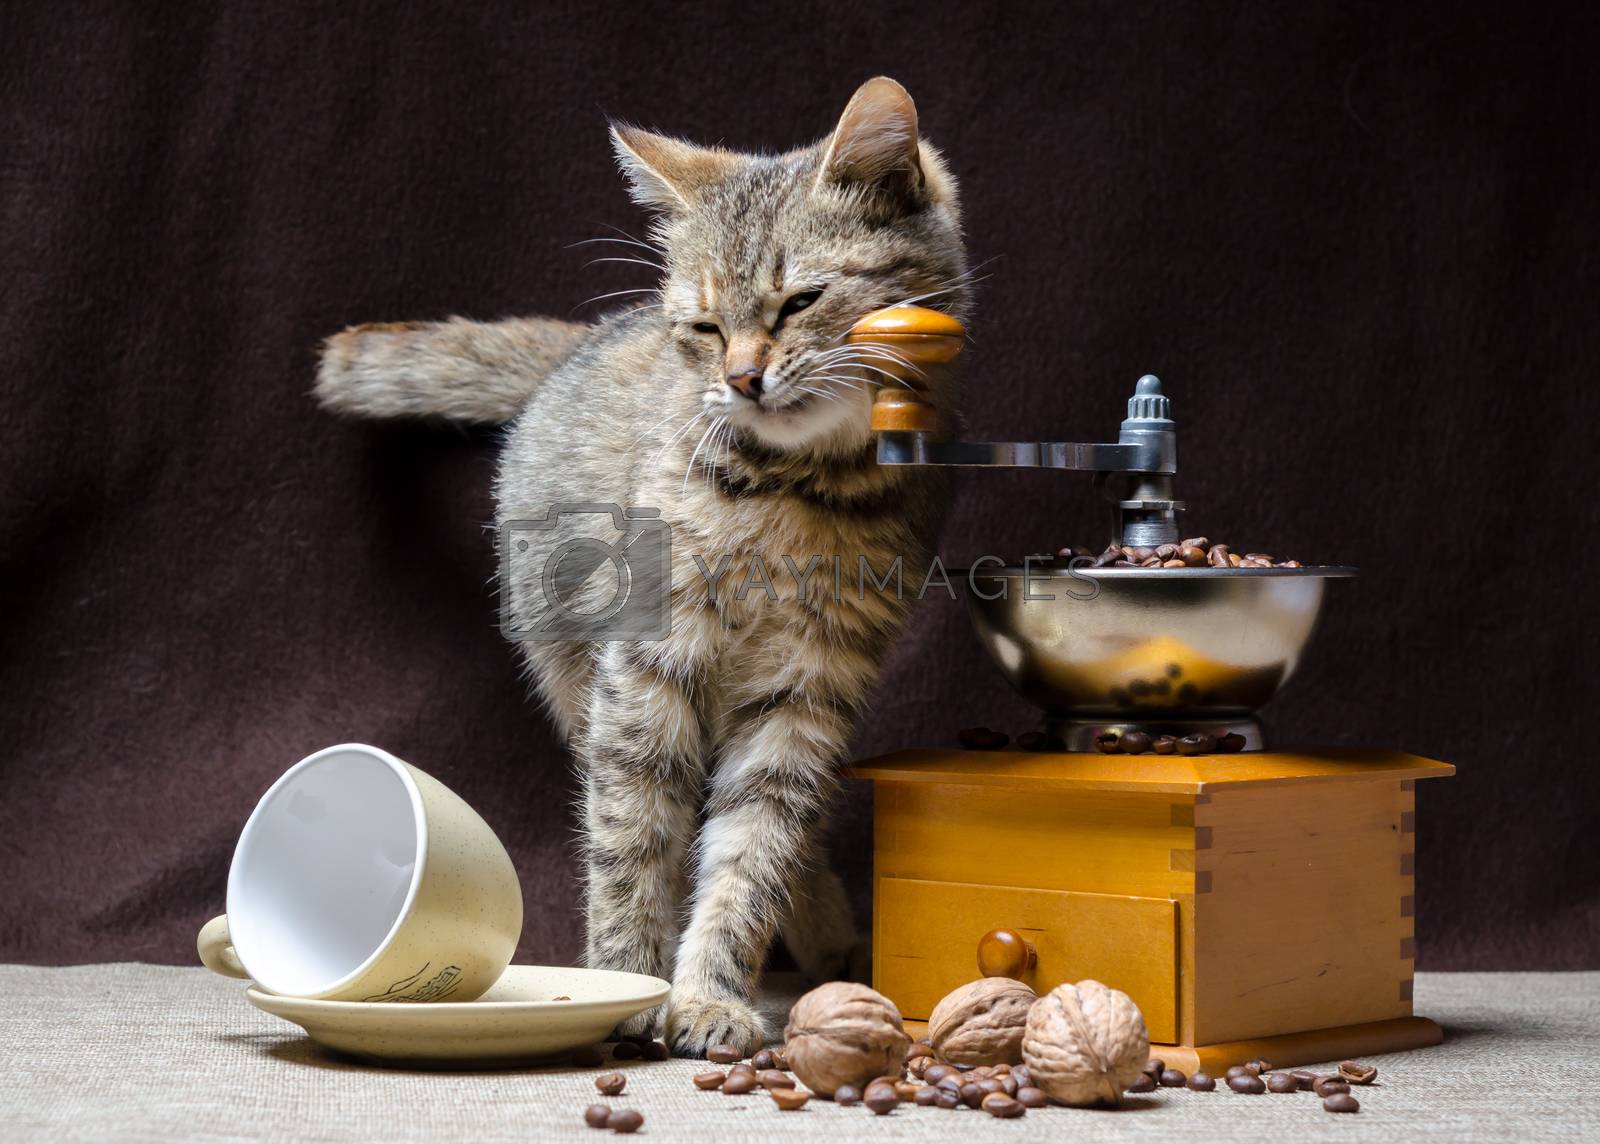 Royalty free image of tabby kitten and coffee by Gera8th